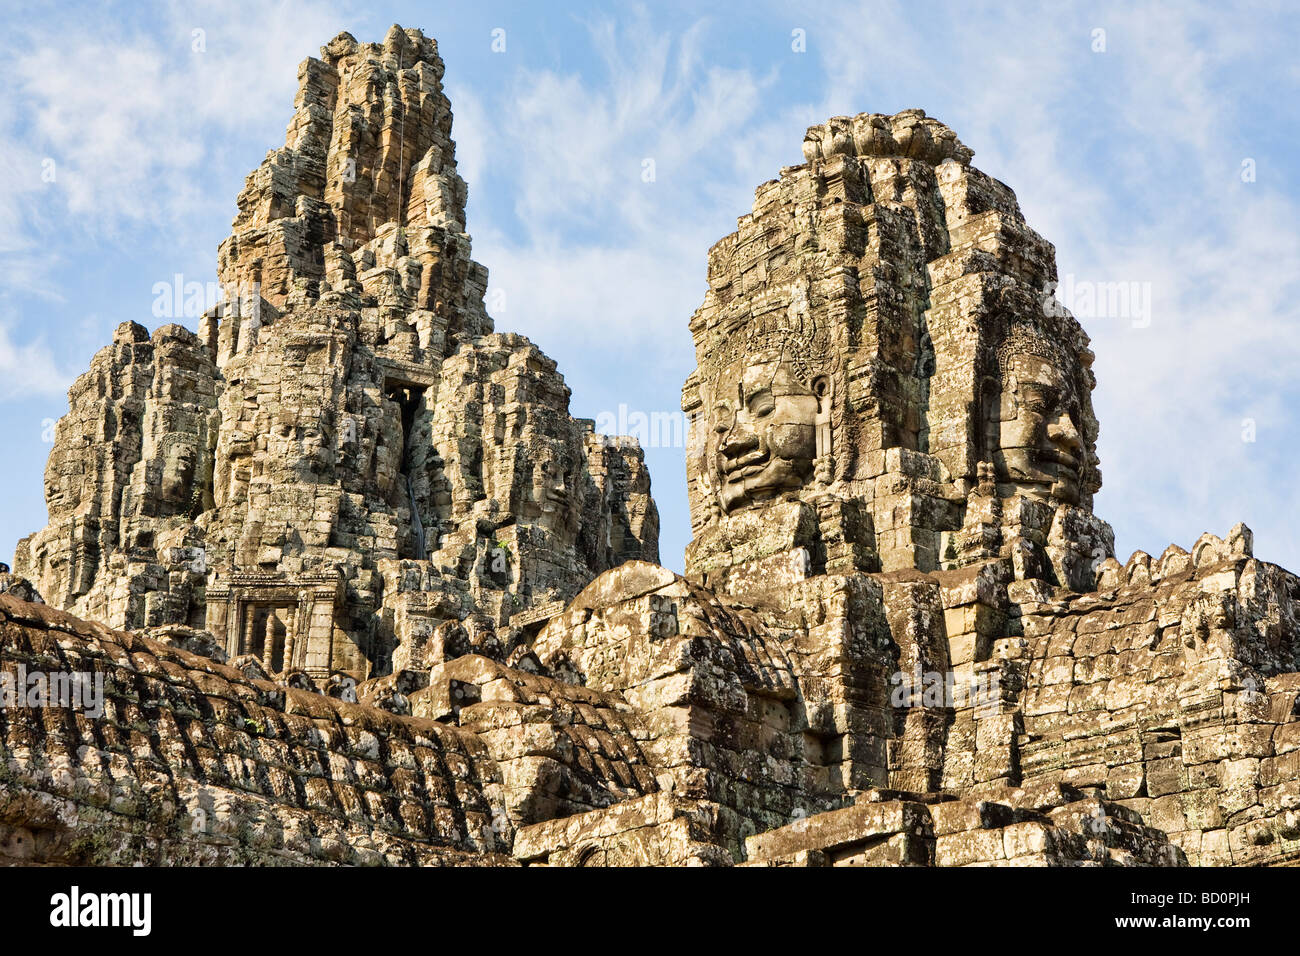 The Bayon, a Khmer temple at Angkor in Cambodia at the centre of Angkor Thom. Built in the late 12th century/early 13th century. Stock Photo